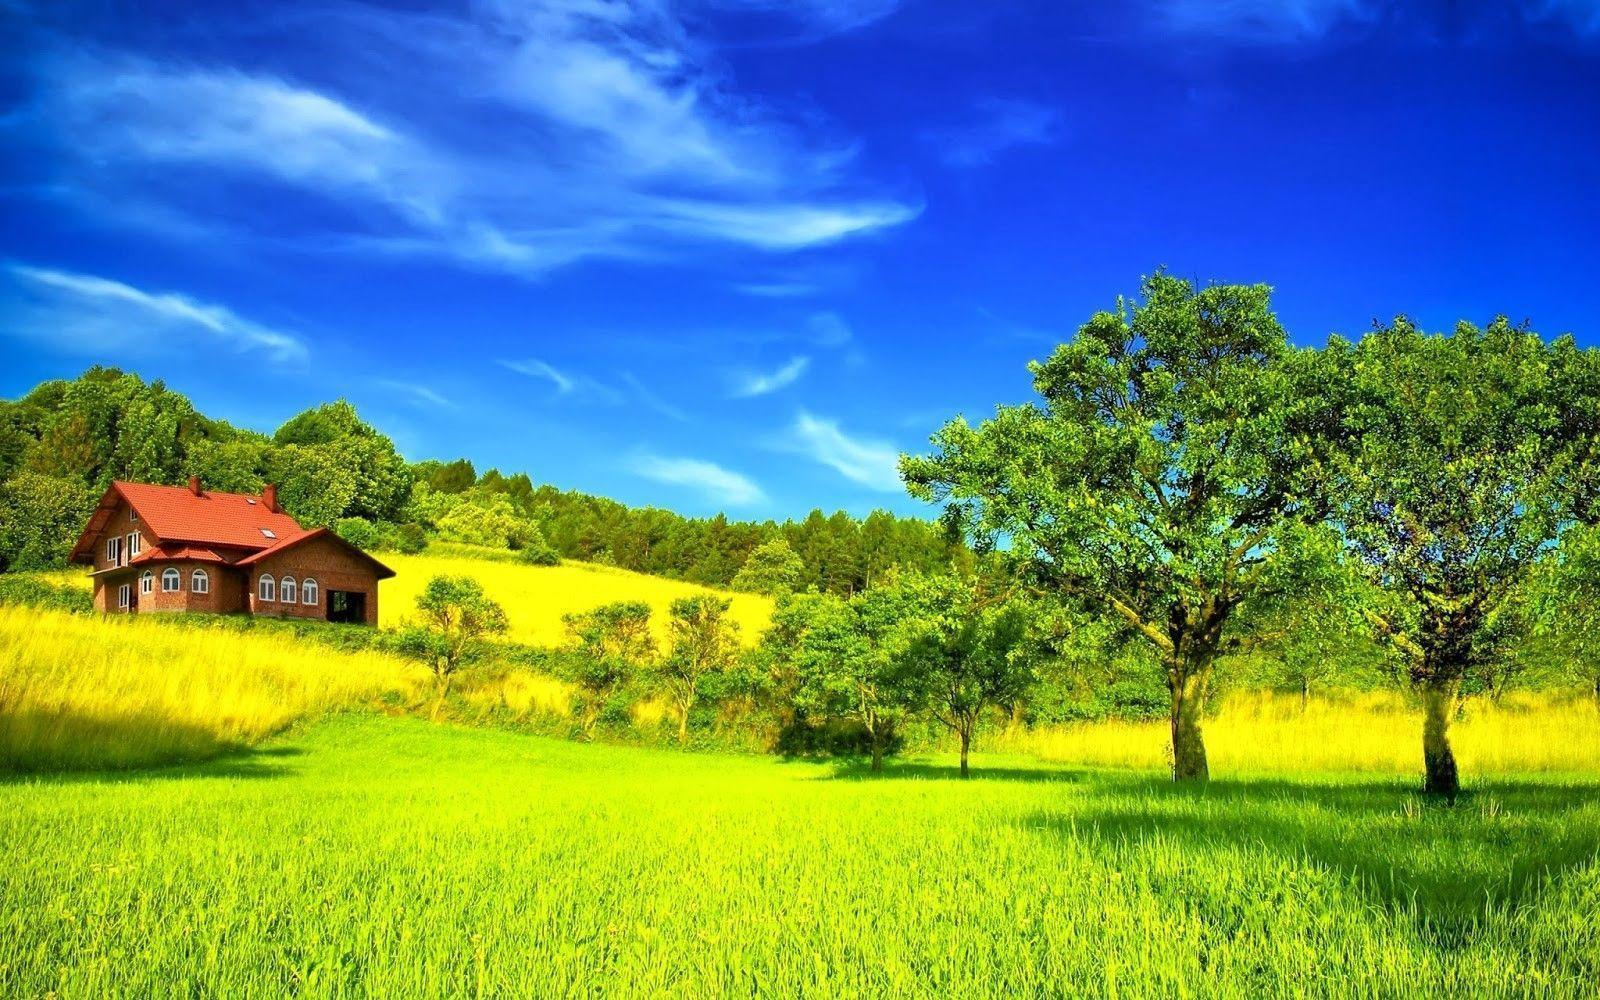 most beautiful green nature wallpaper in the world